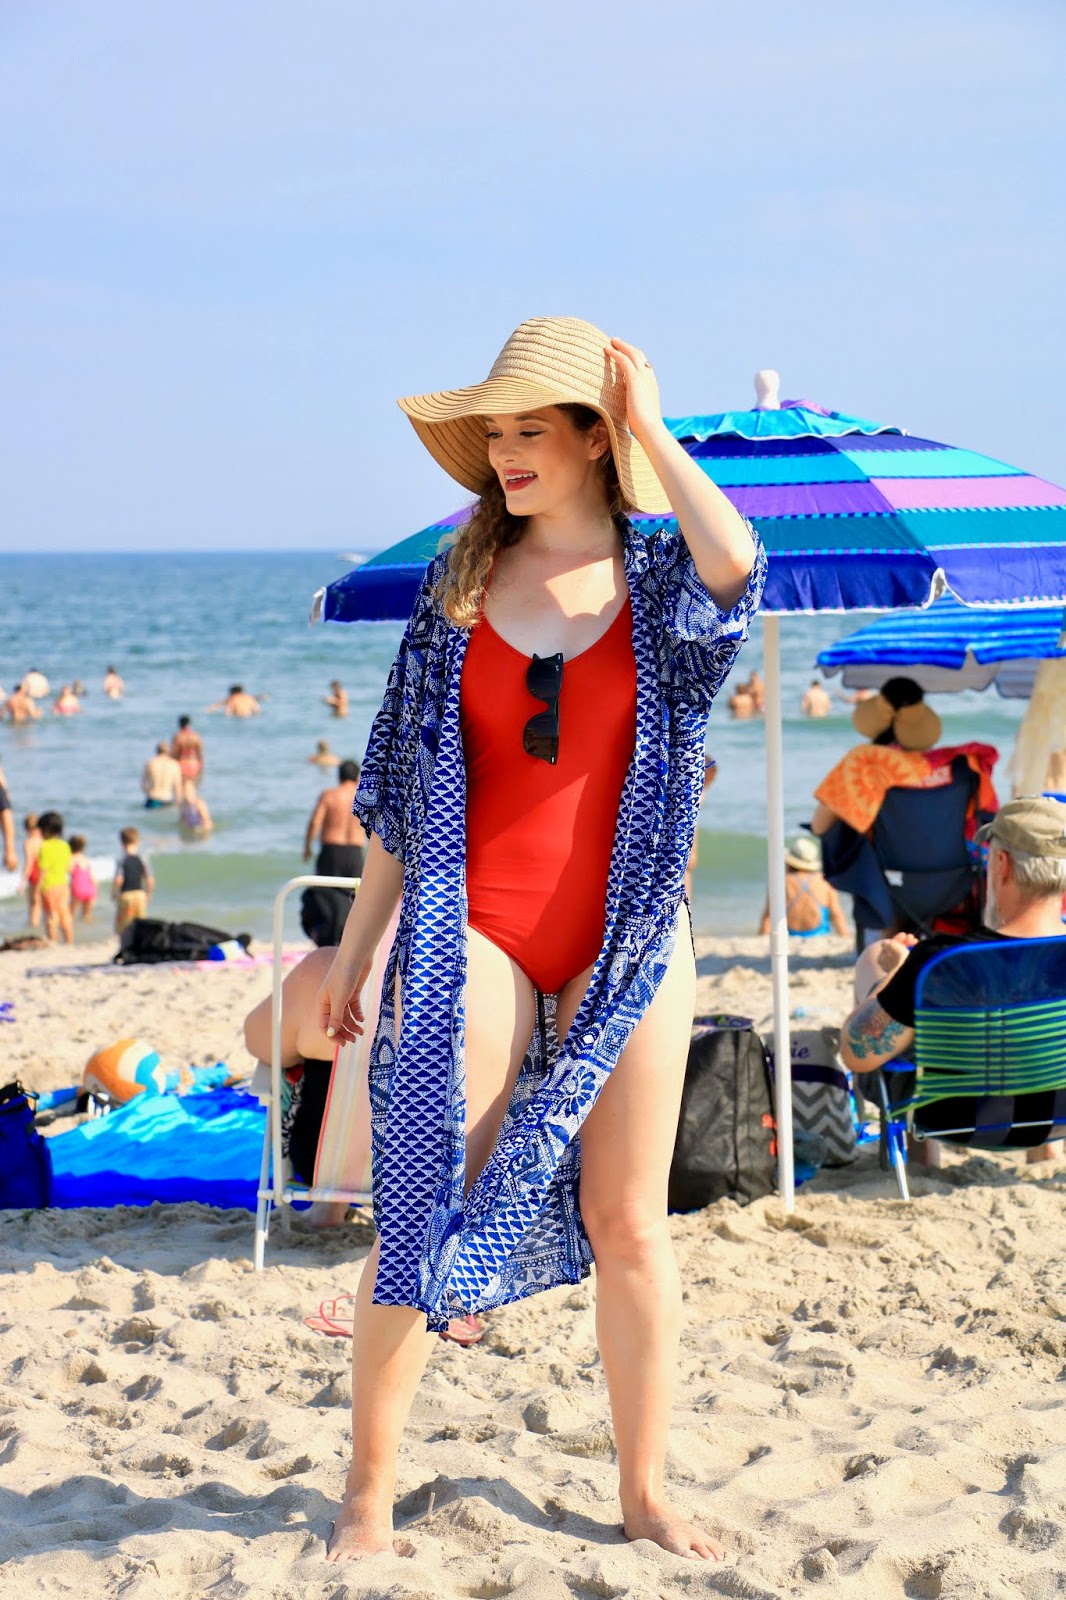 Nyc fashion blogger Kathleen Harper's beach outfit